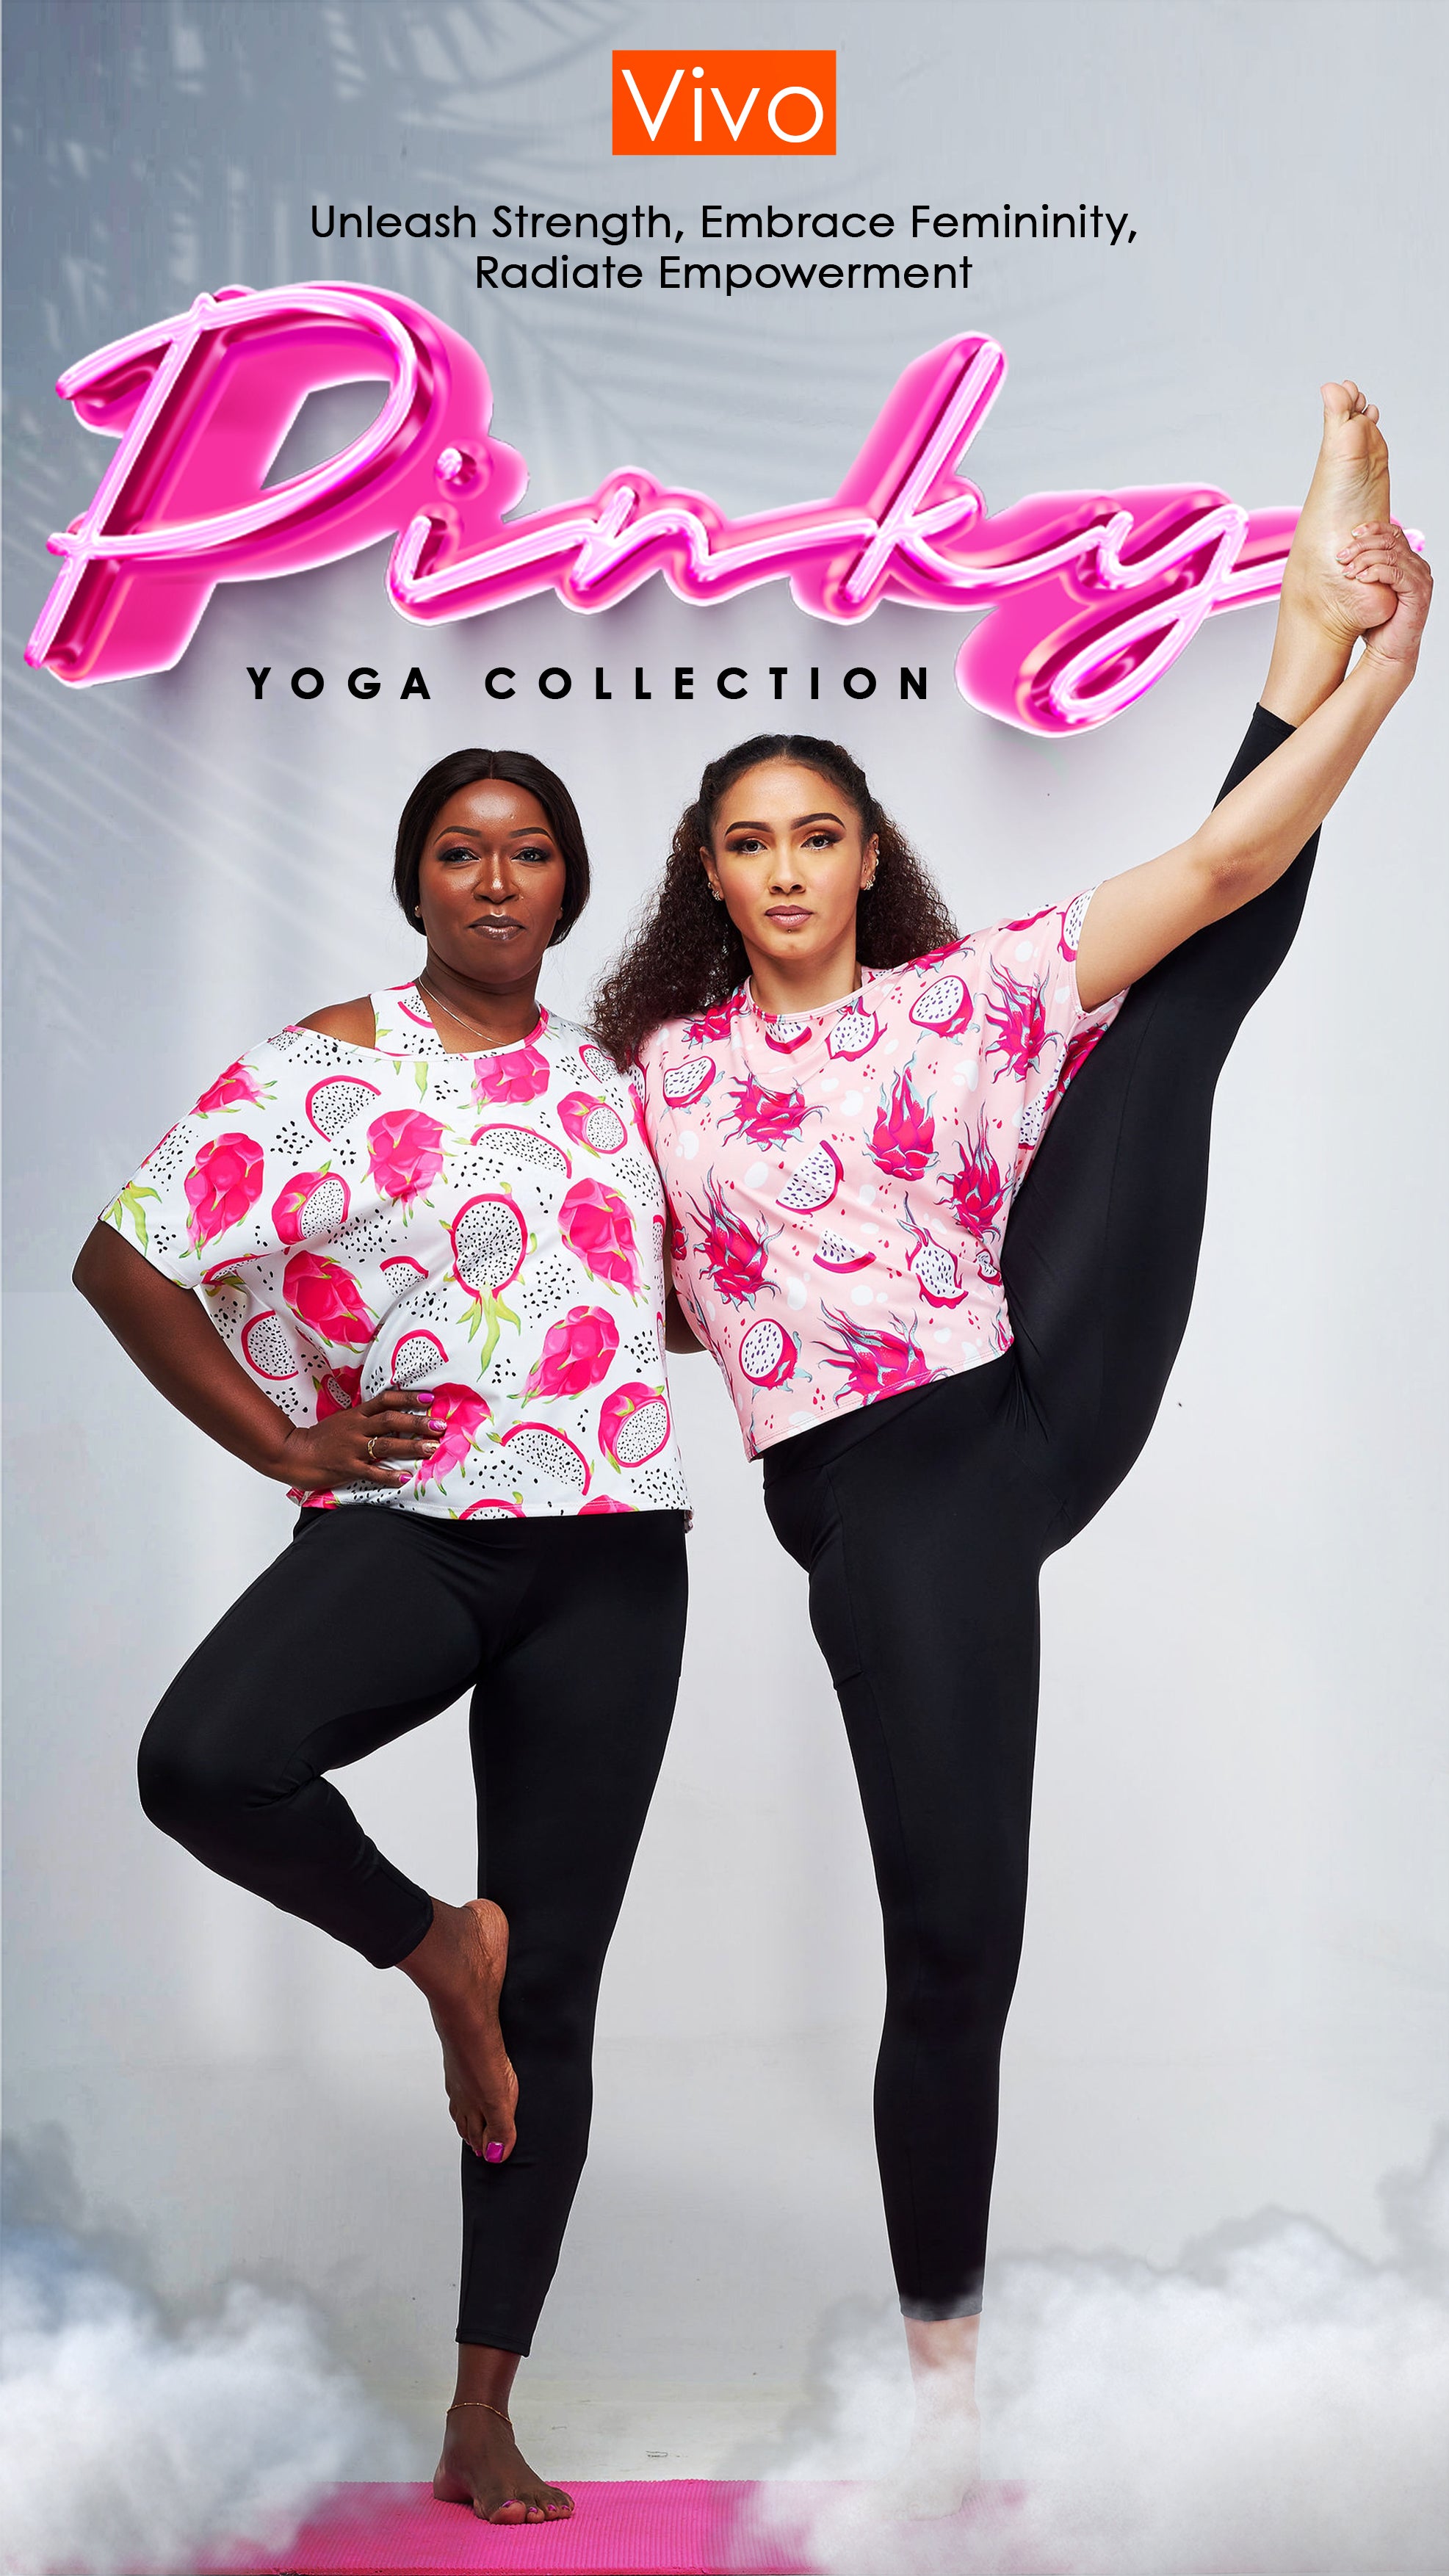 Unleashing Strength and Embracing Femininity: Introducing the Vivo X Pinky Yoga Collection!